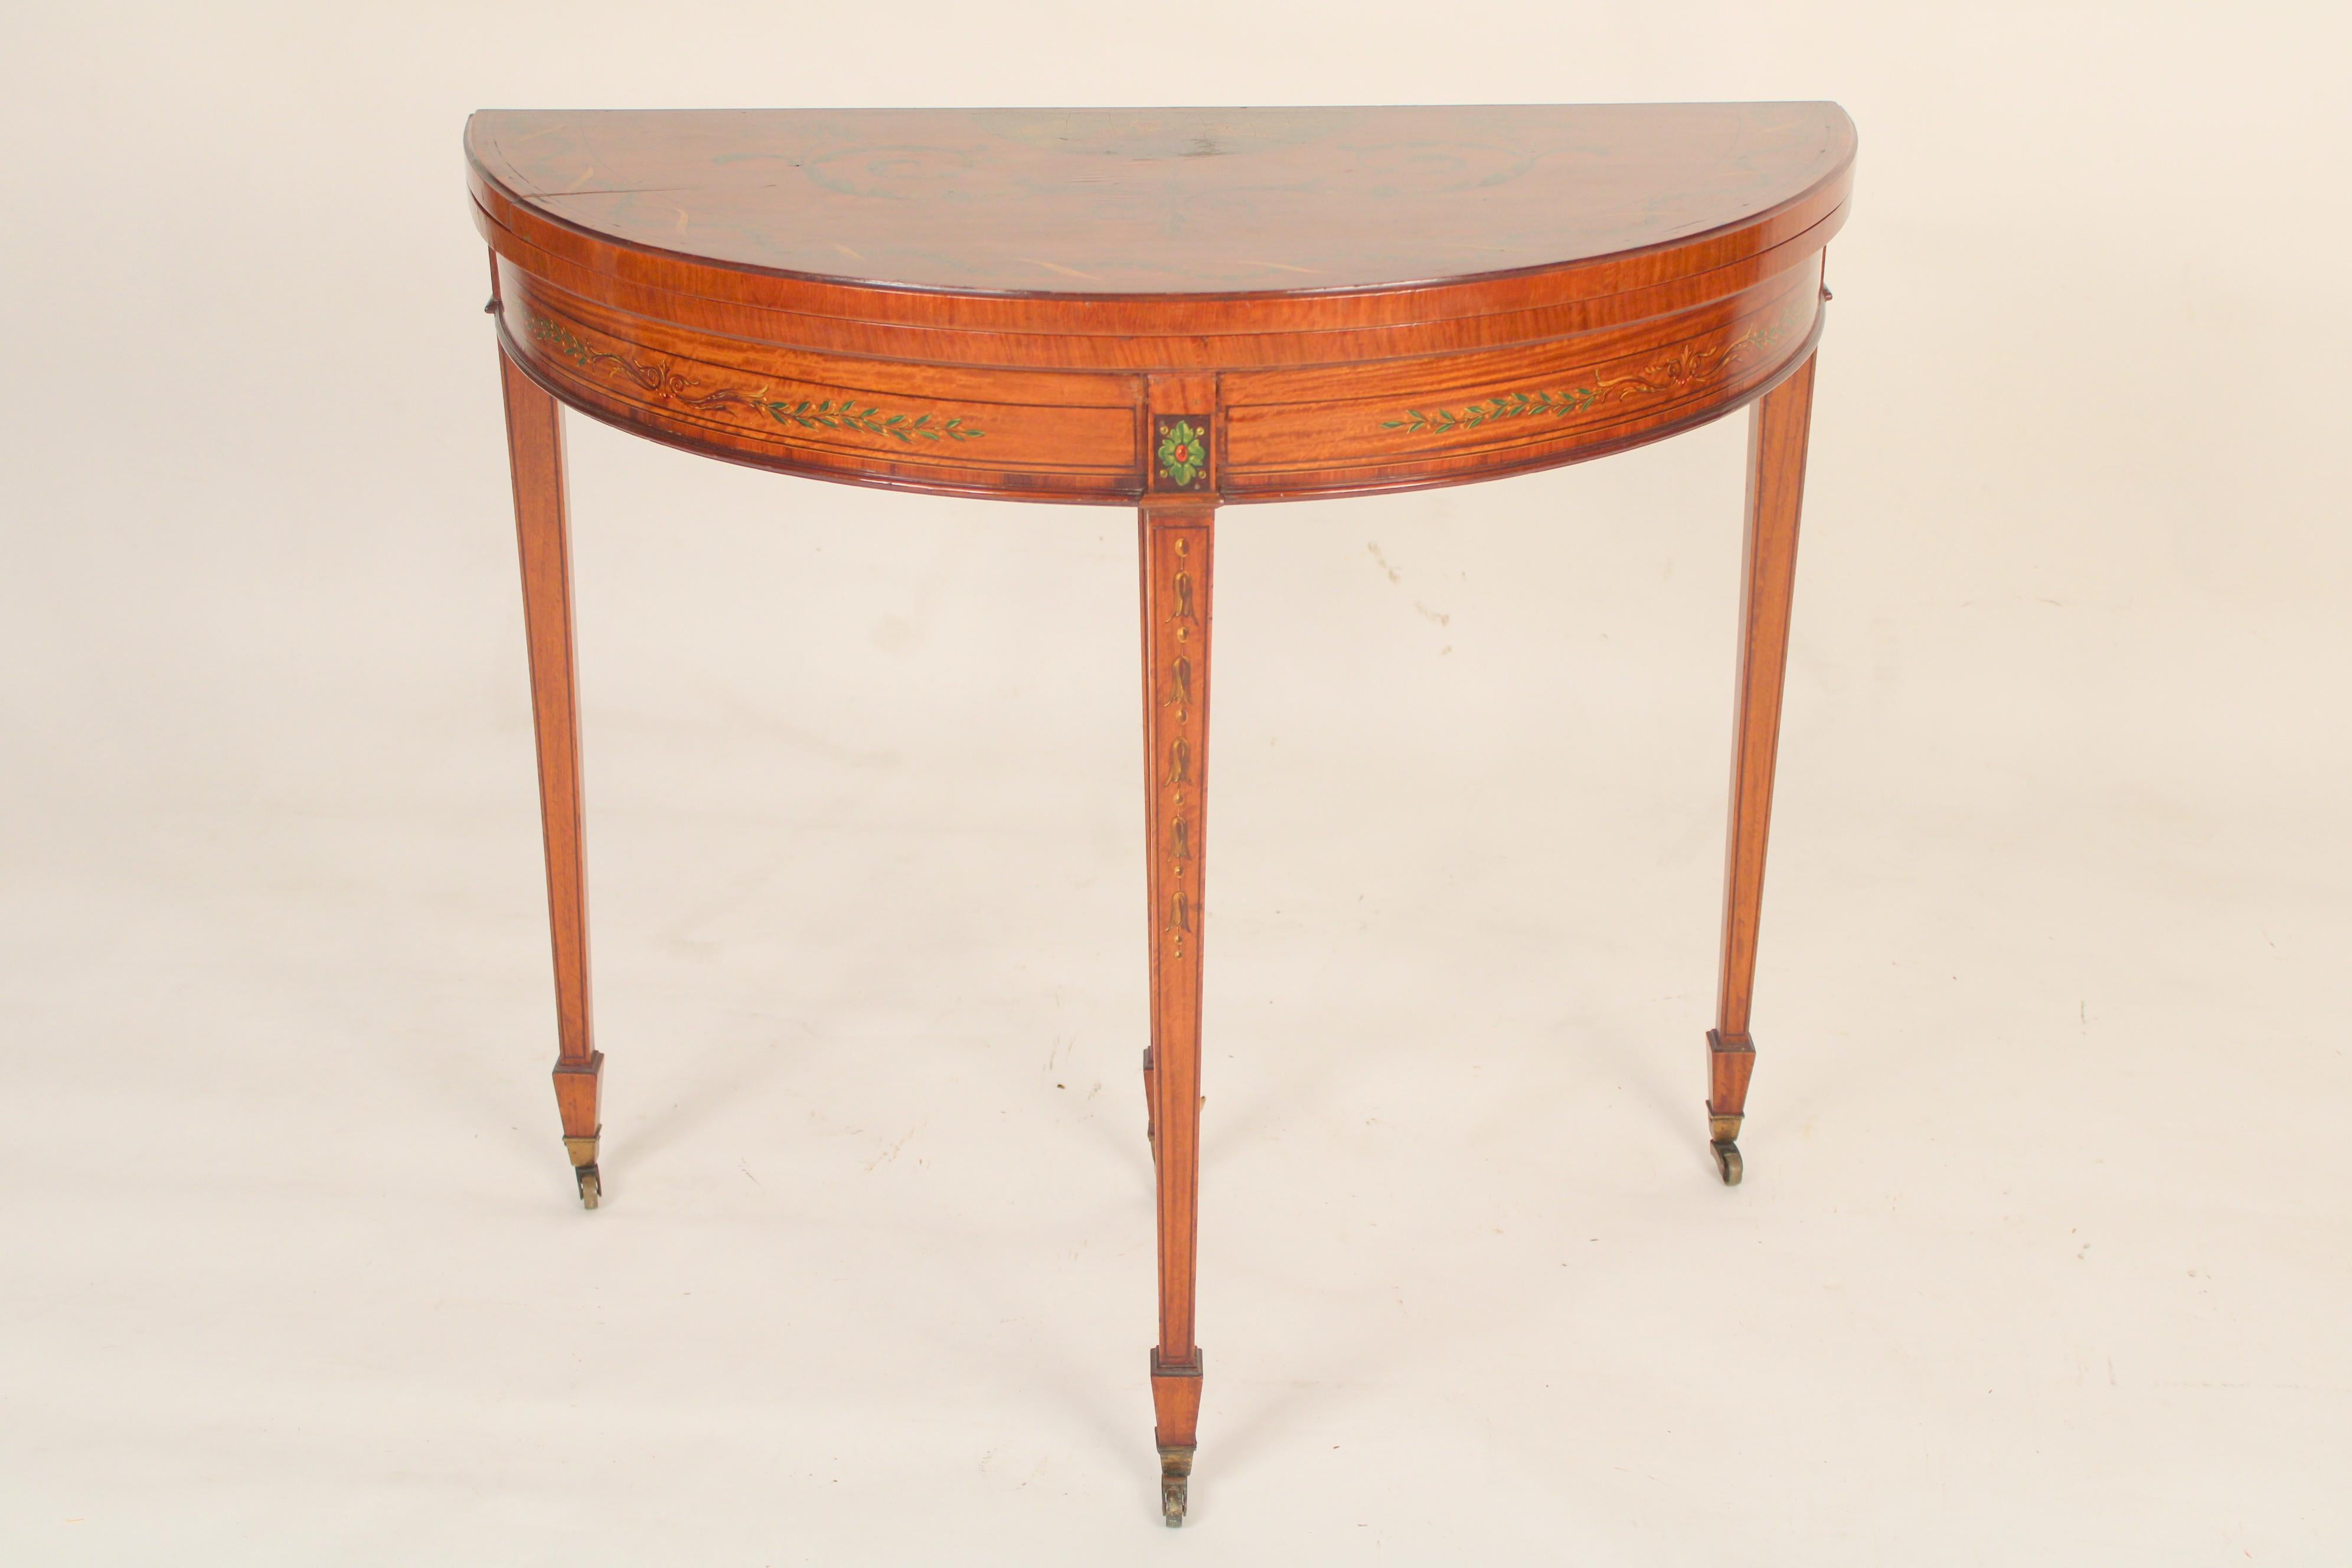 English Edwardian painted satin wood demi lune games table, circa 1900. The demi lune top painted with a group of cupids and vines. The frieze painted with flowing vines. The square tapered legs painted with bell flowers ending in brass casters. The